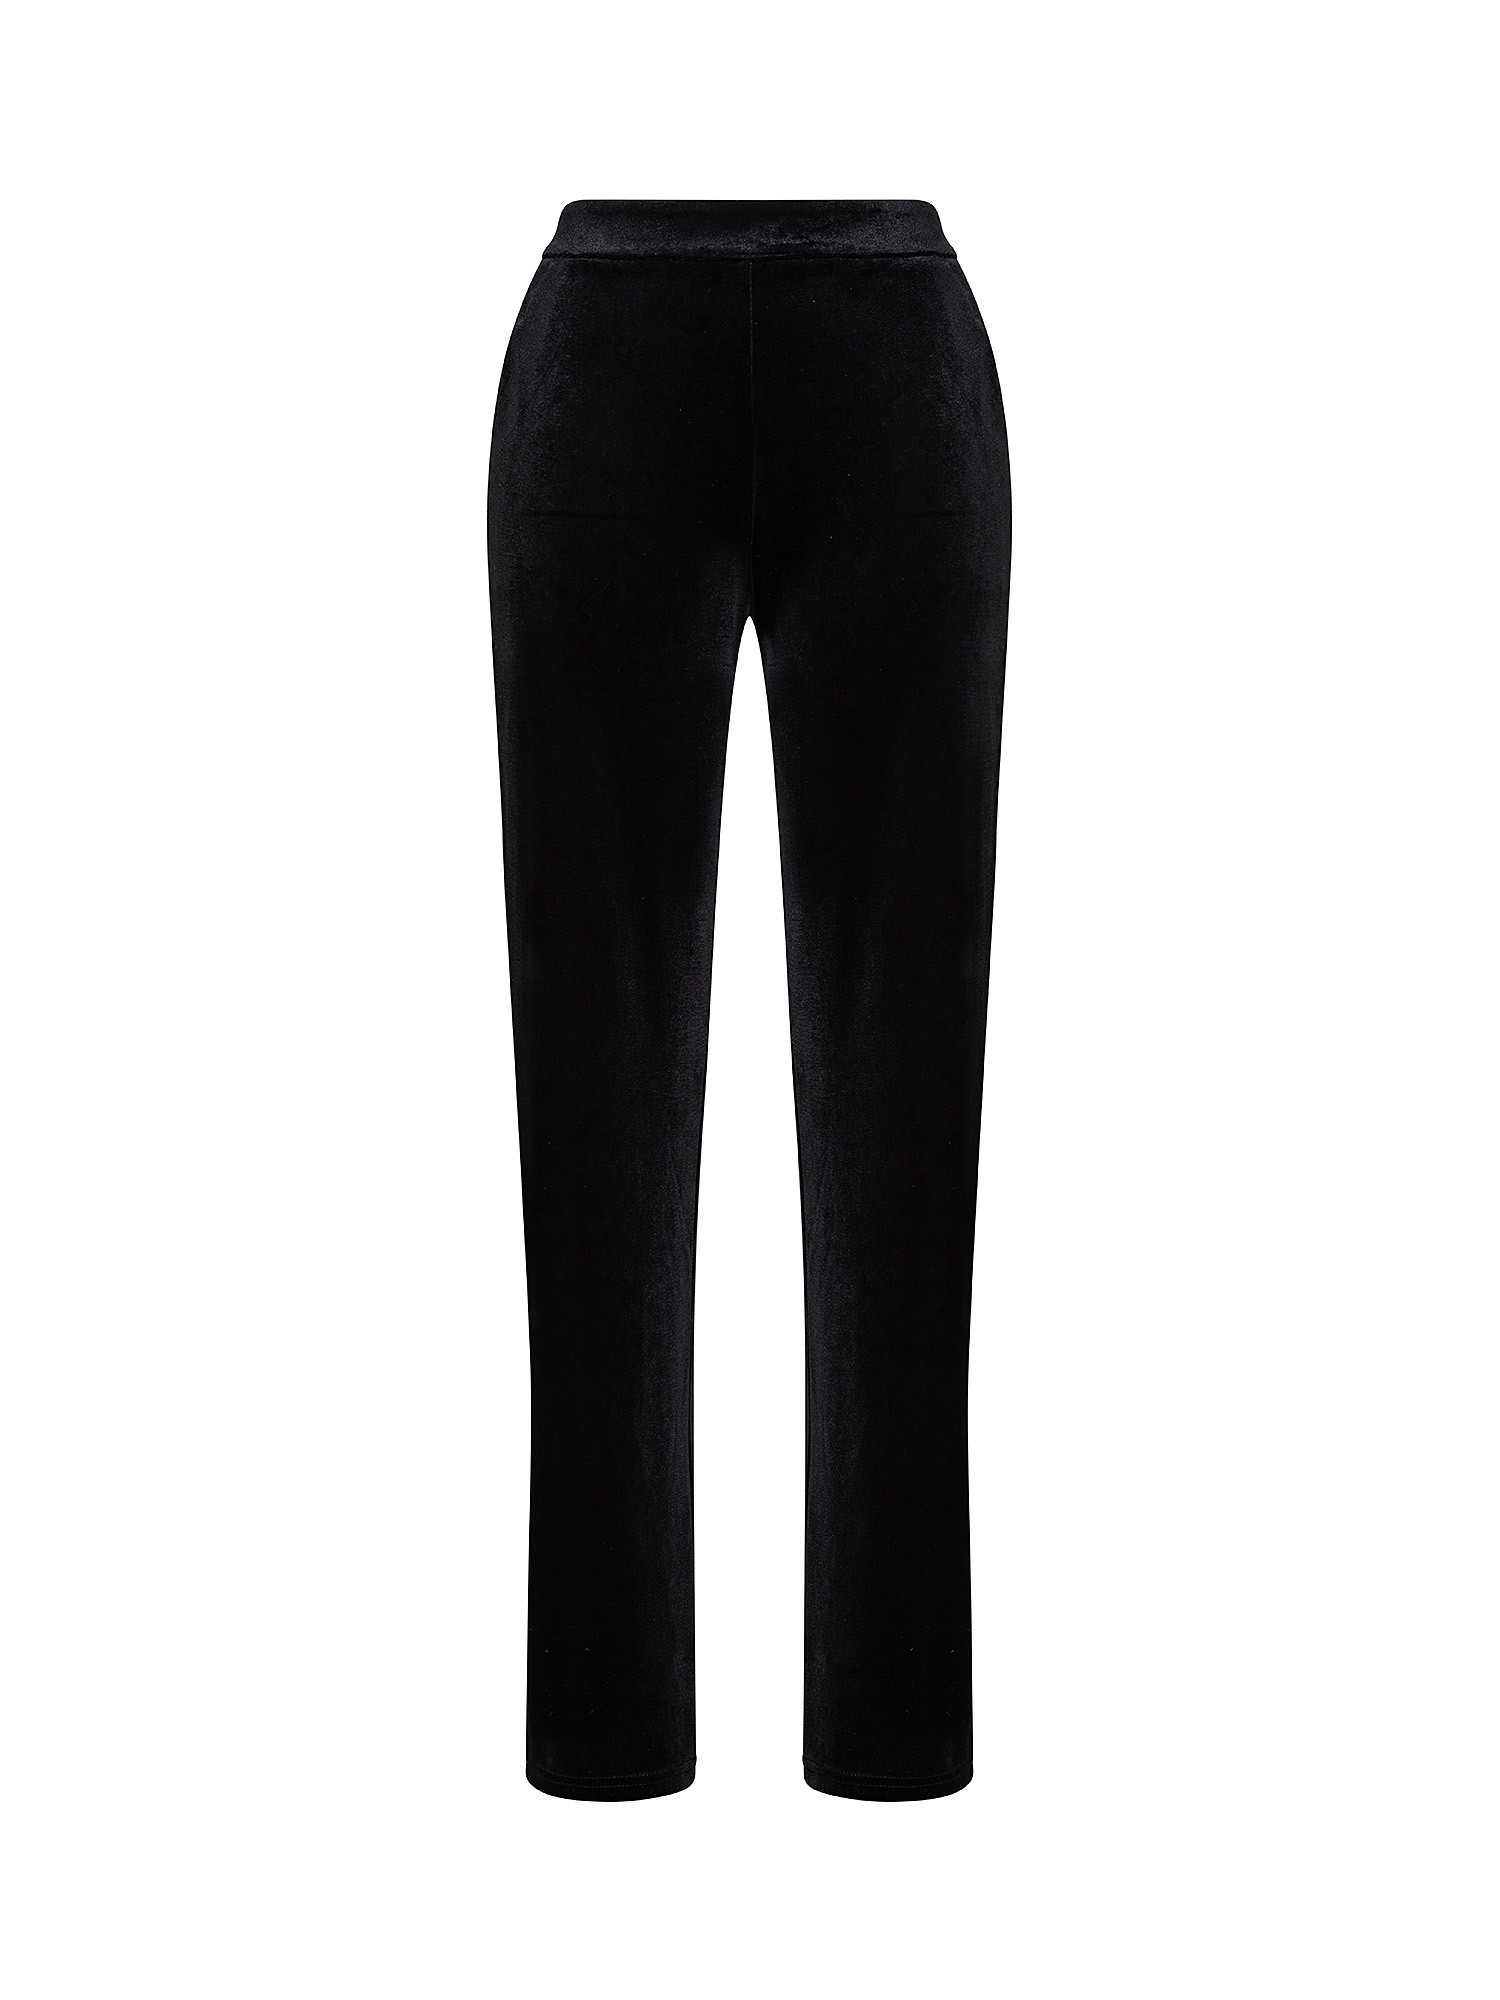 Chenille trousers, Black, large image number 0